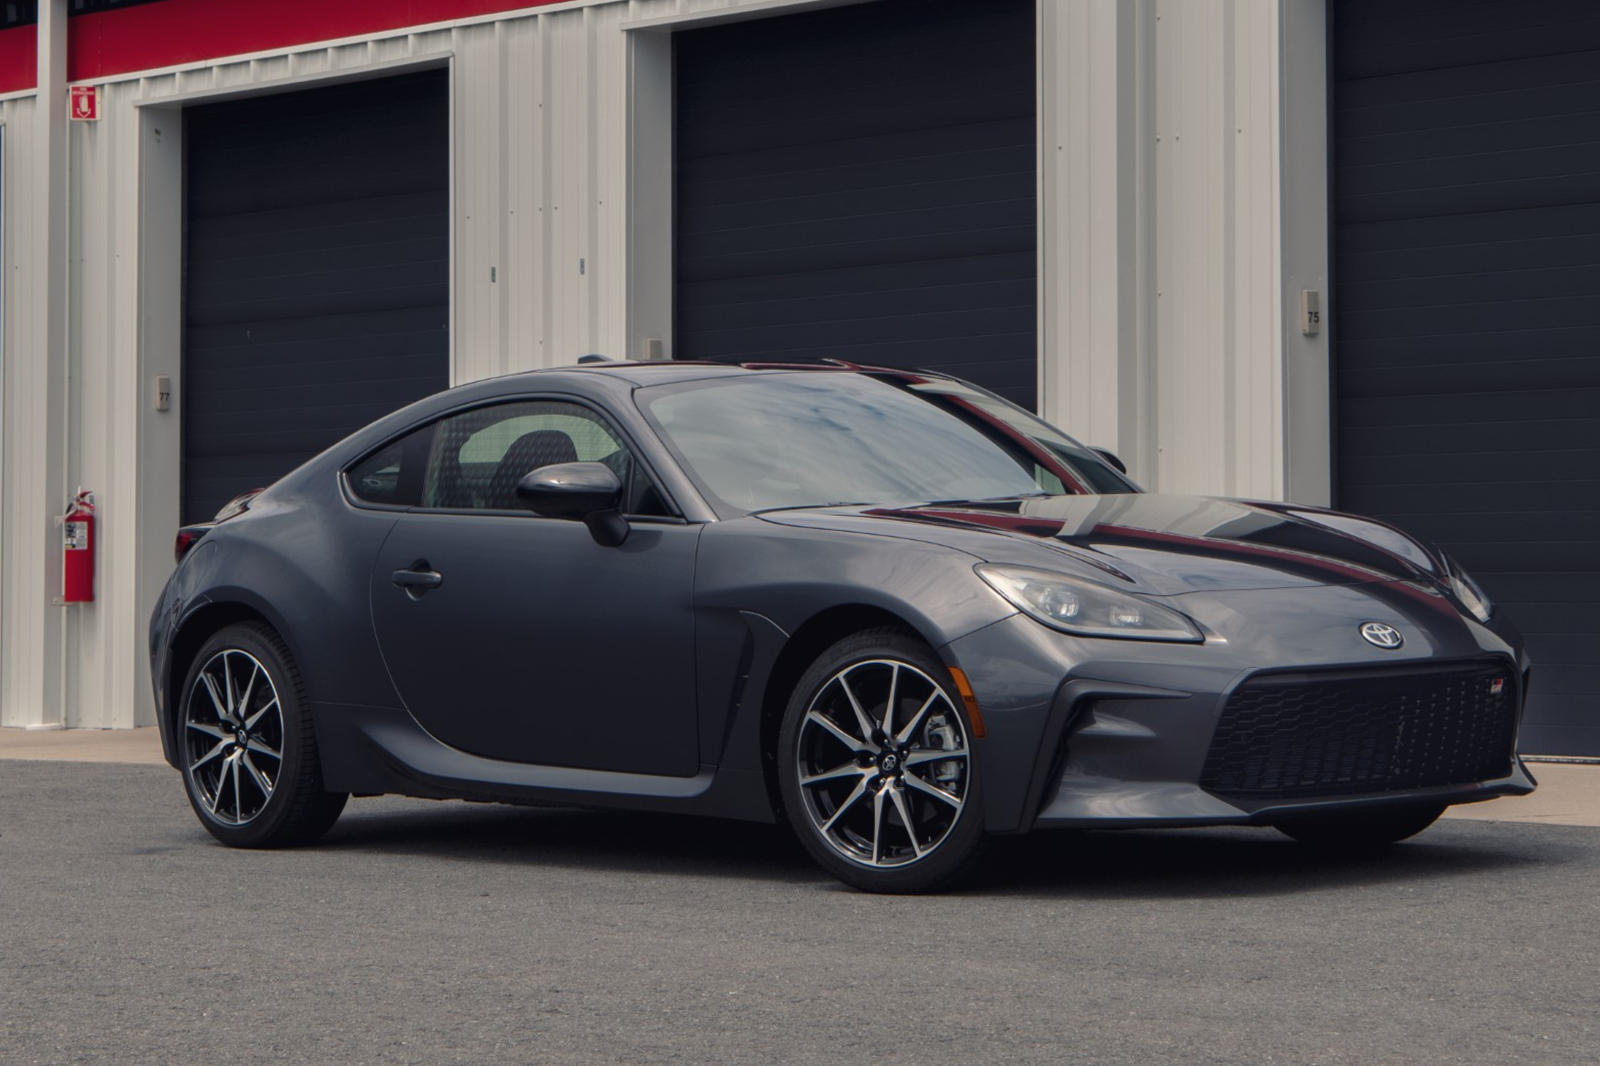 The Pavement Grey Toyota 86 GT can be discussed on the Toyota GR86, 86 FRS, and Subaru BRZ Forum, which is an owners community hosted by FT86CLUB.